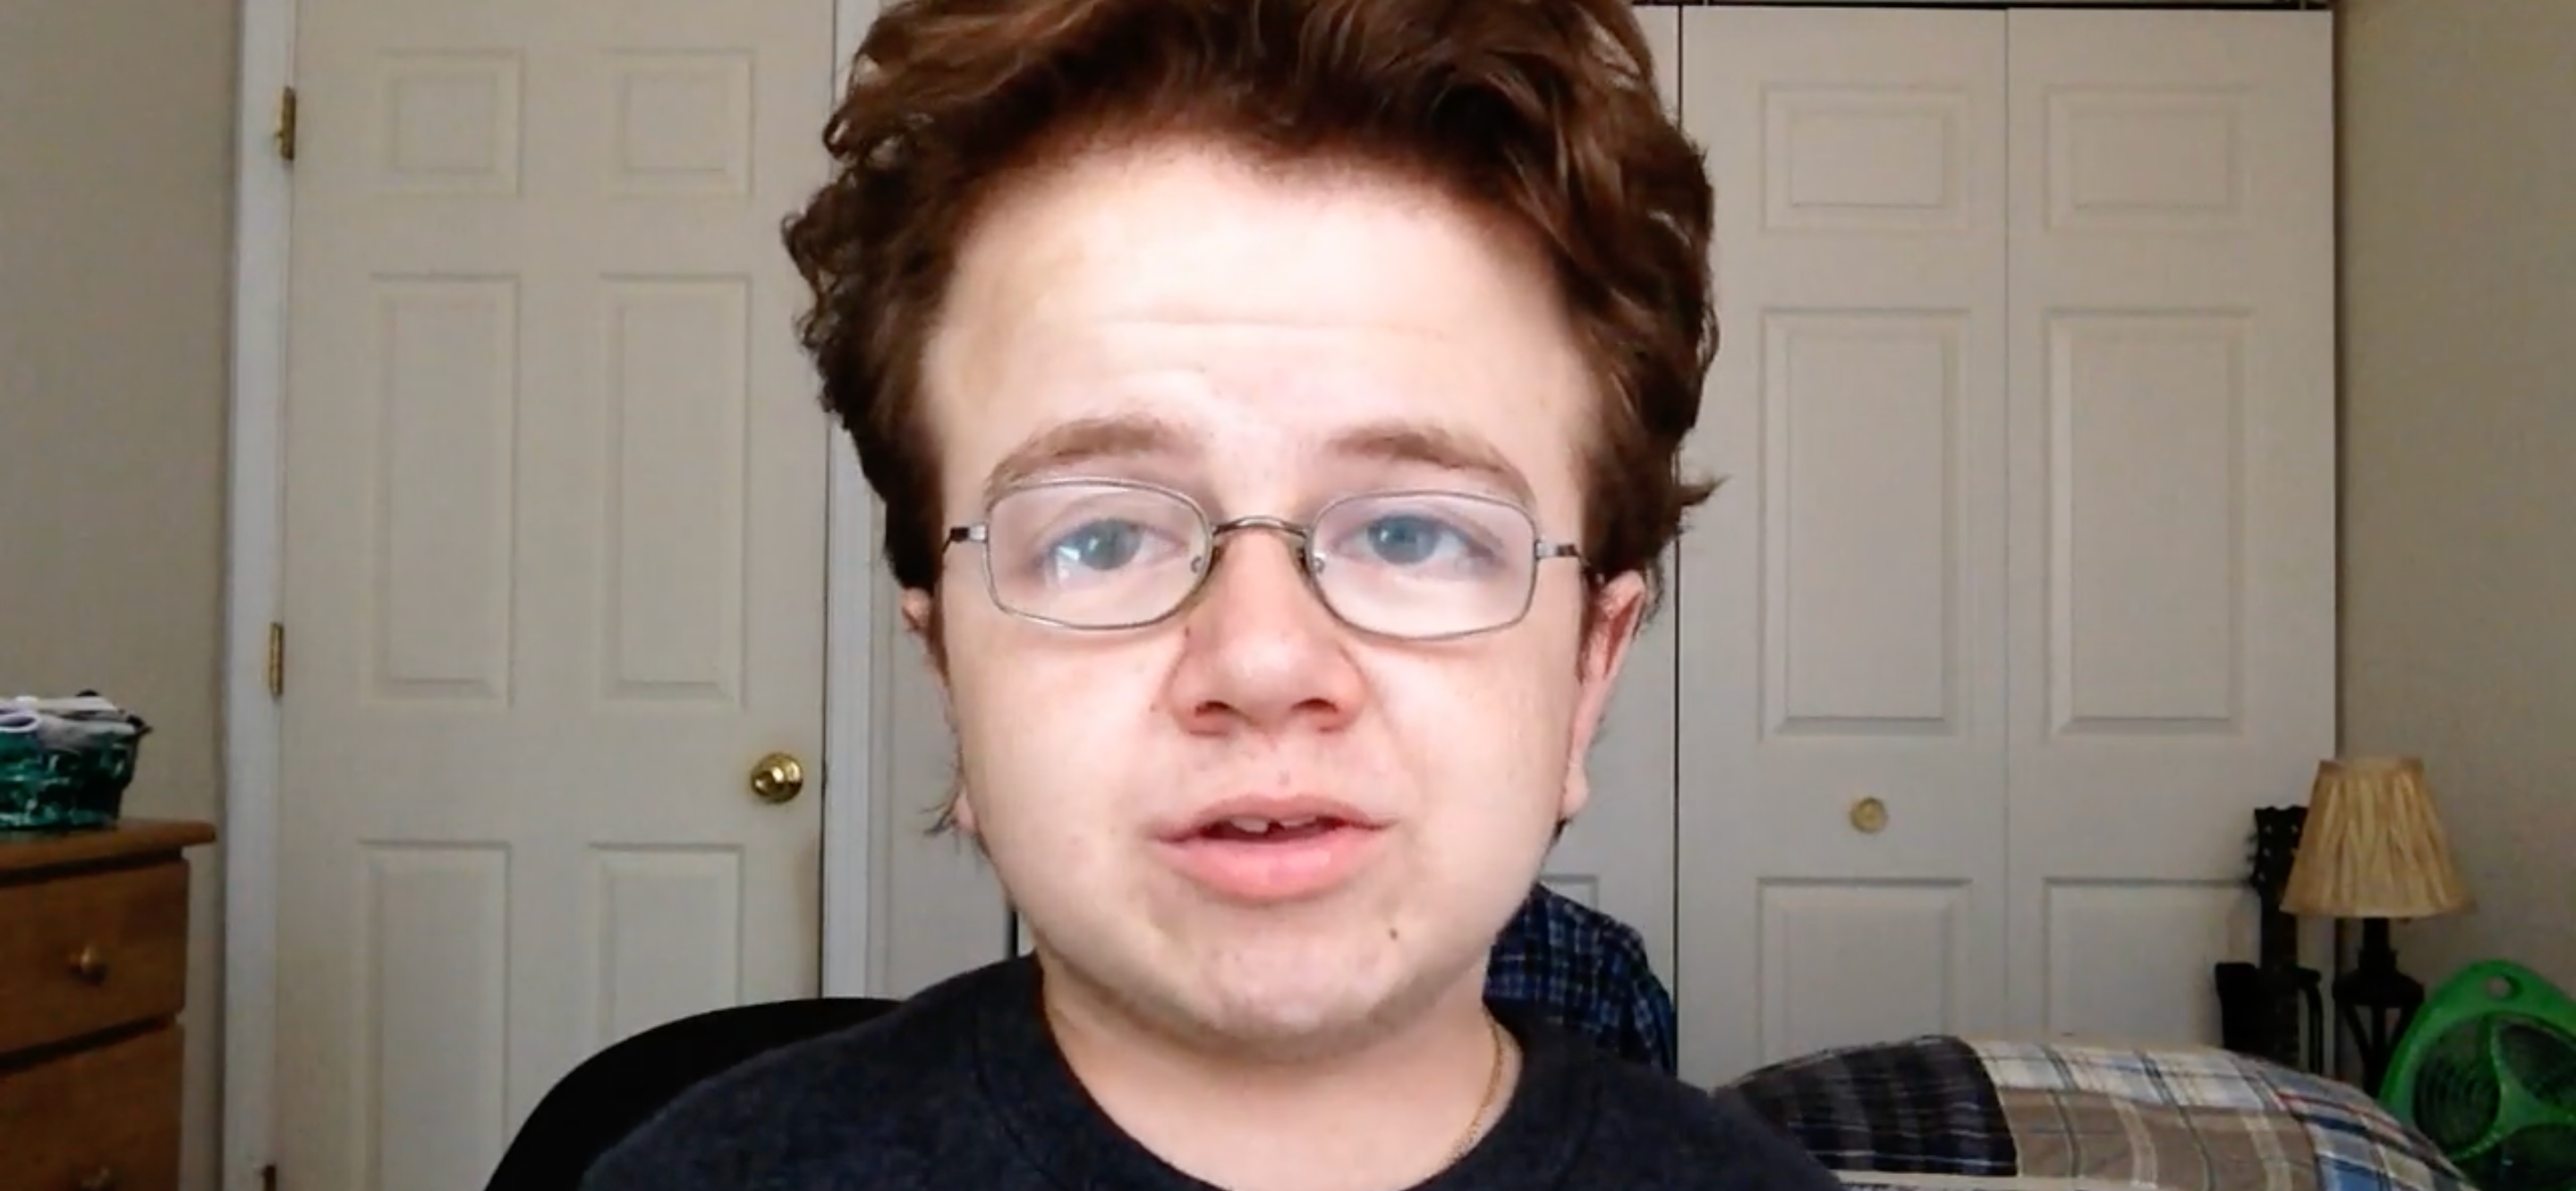 YouTube Star Keenan Cahill Dead at 27, Weeks After Open Heart Surgery